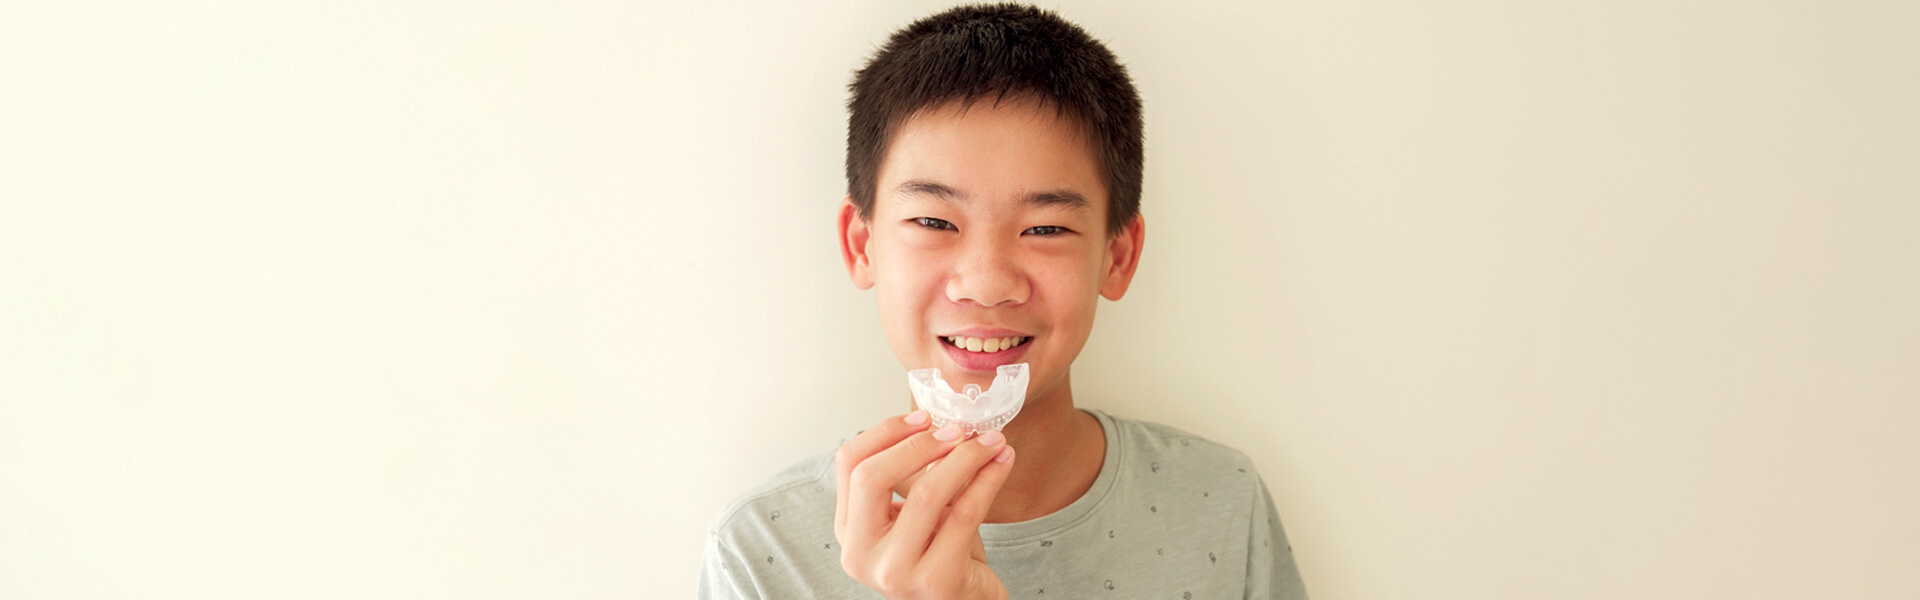 Ensure Your Child’s Safety with a Custom Mouthguard